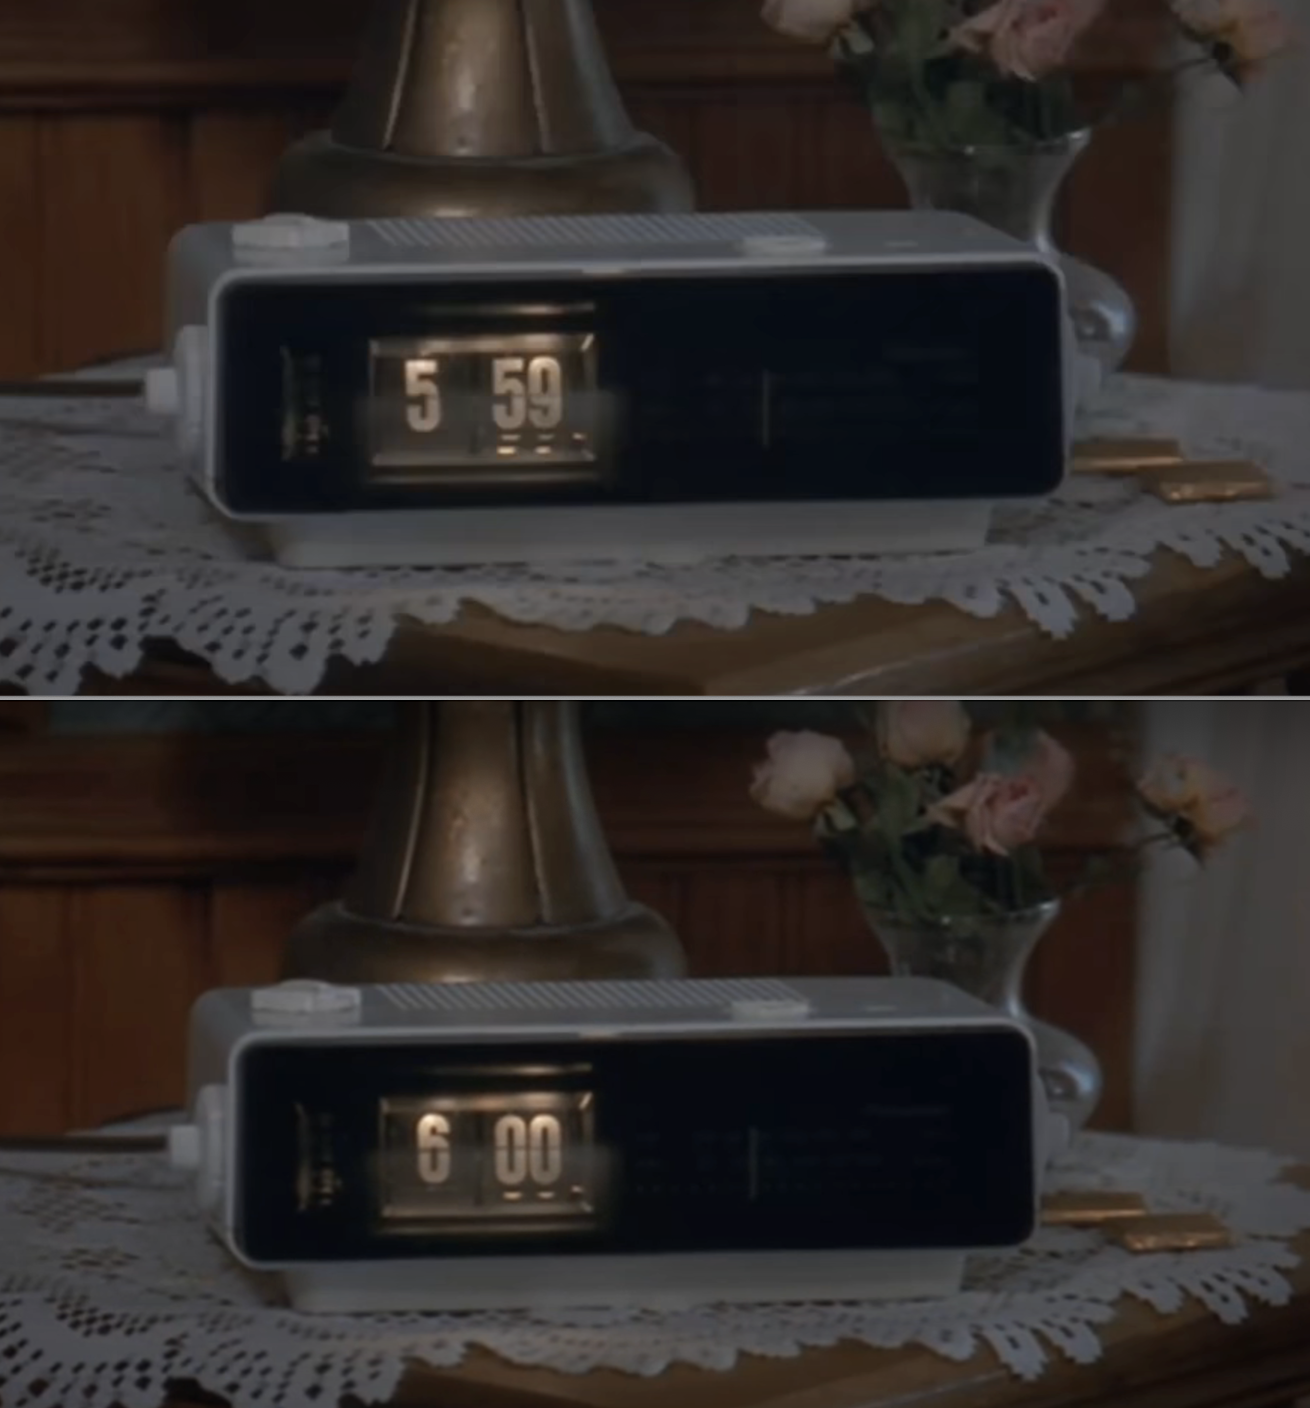 Vintage flip clock showing times 5:59 and 6:00 on a lace-covered table, suggesting a focus on time management or routines